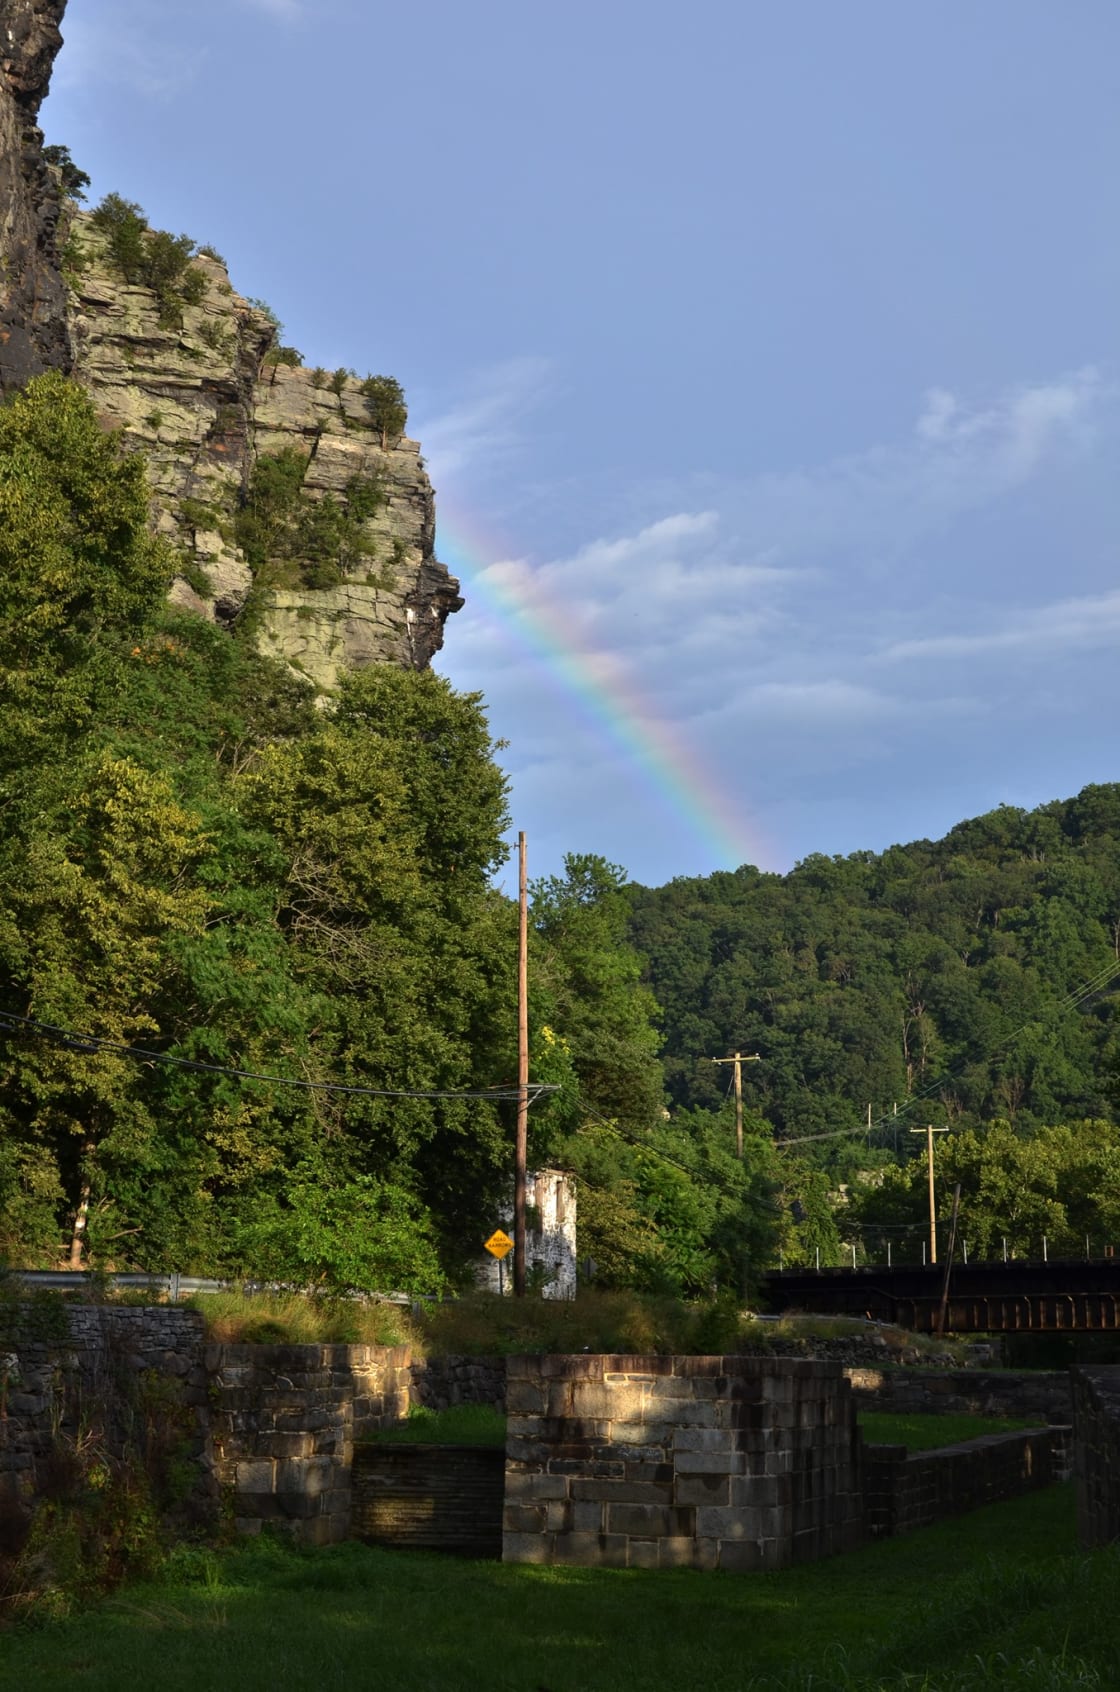 Maryland Heights where you can hiker to top or rock climb up the cliff.